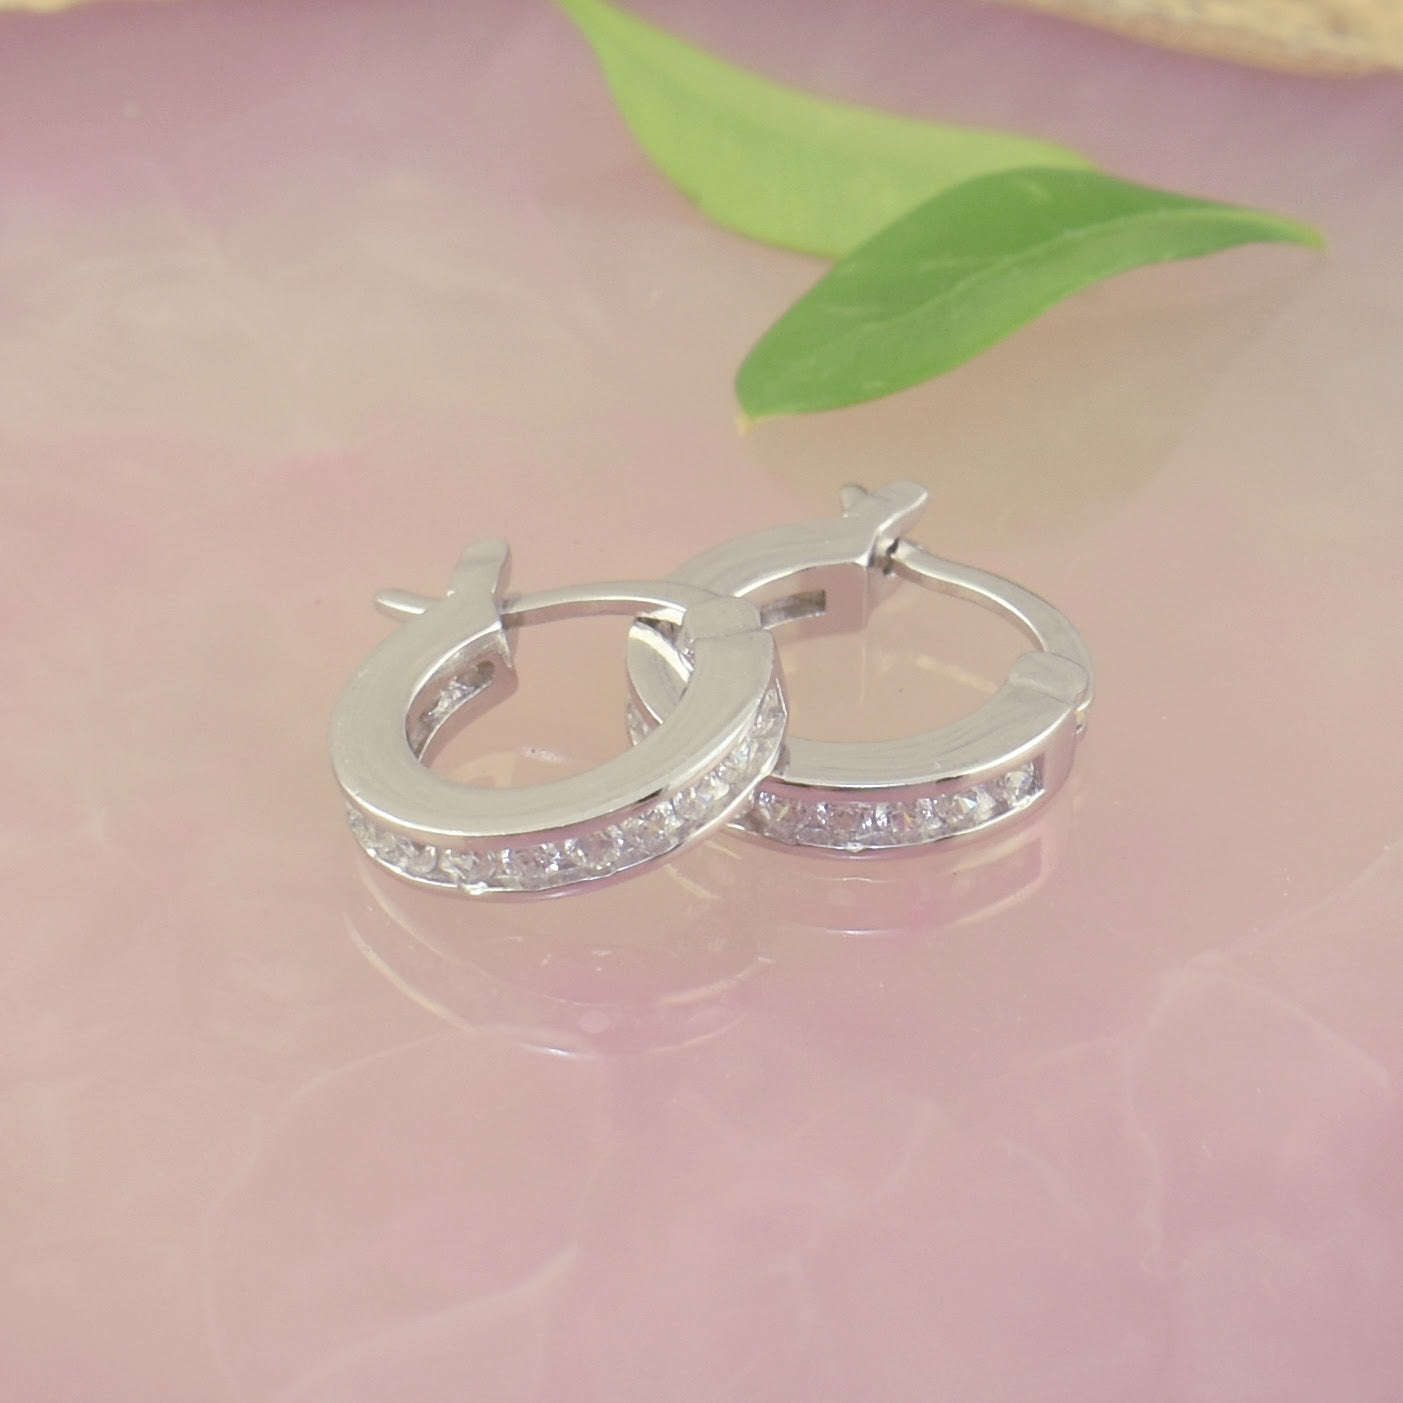 dainty hoop earrings with CZs on the front and back